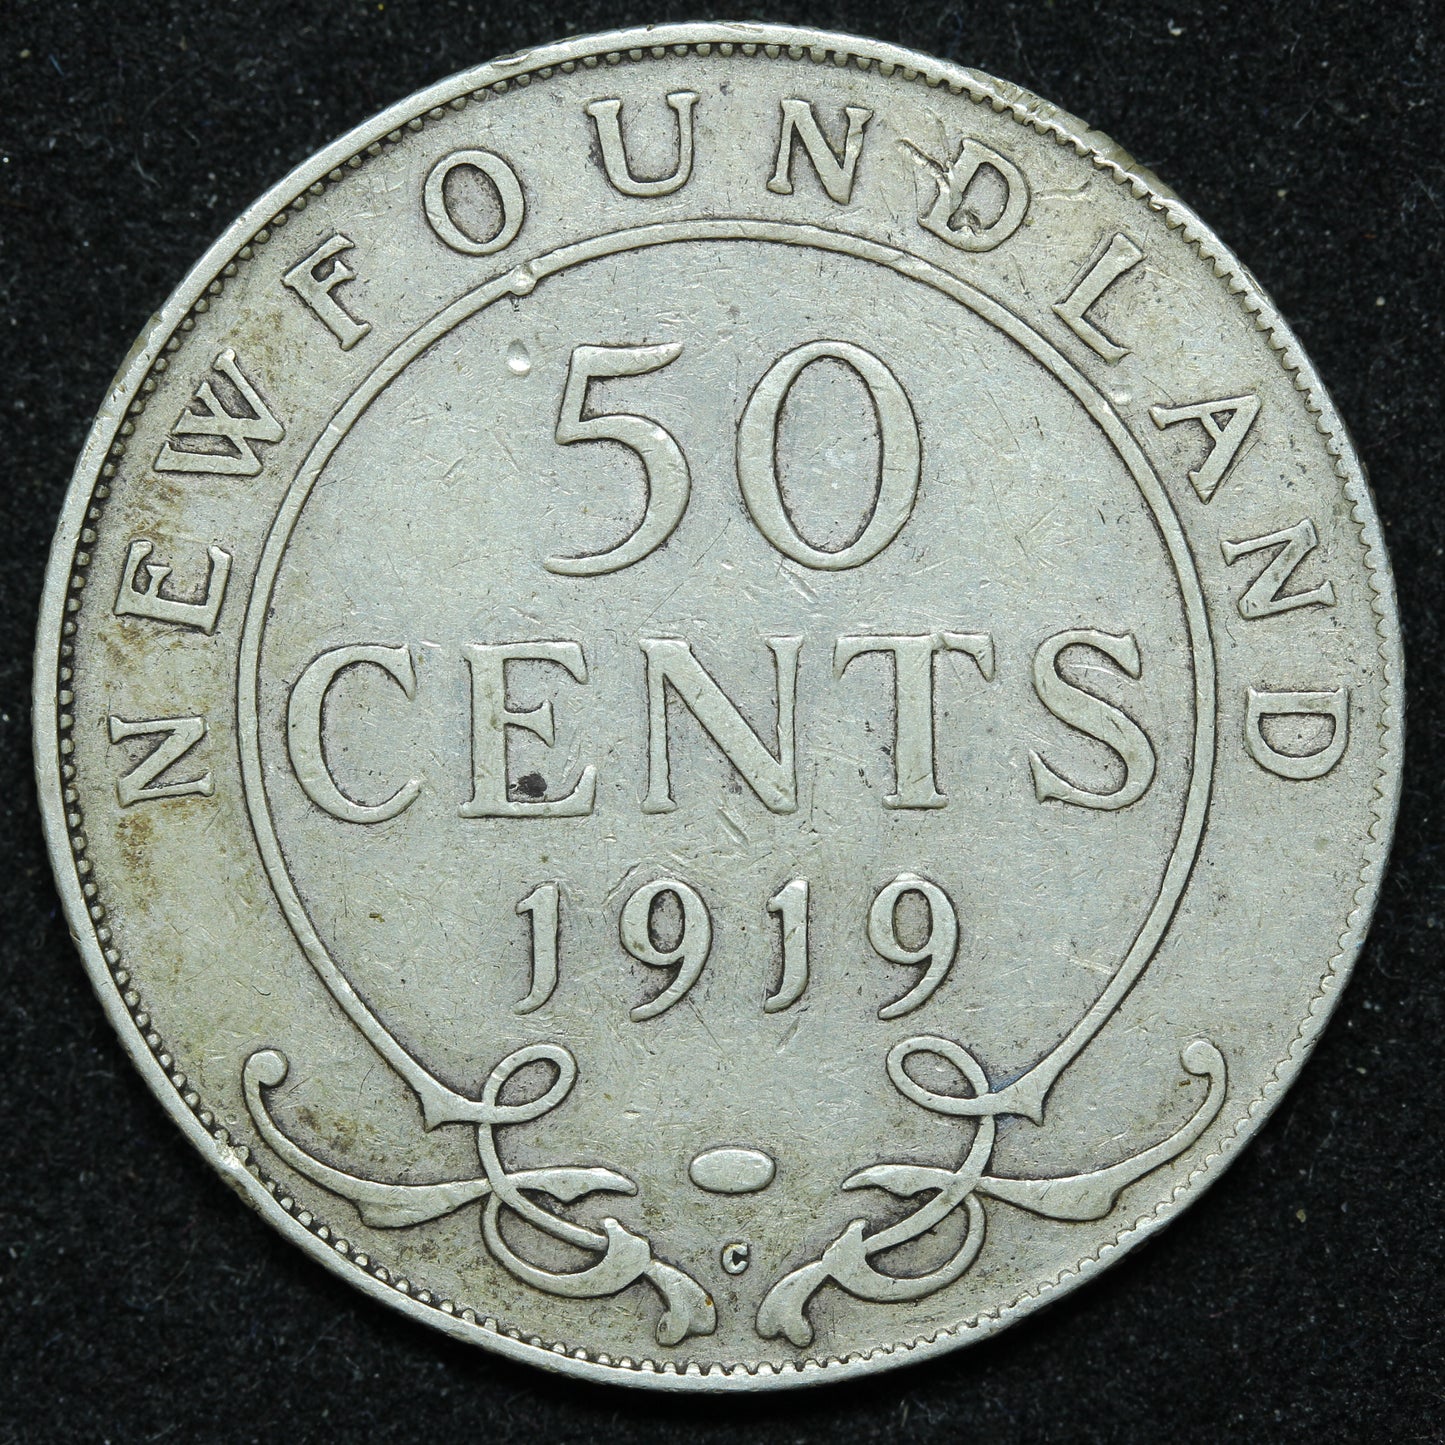 1919 Newfoundland 50 Cents Silver Coin - George V - KM #12